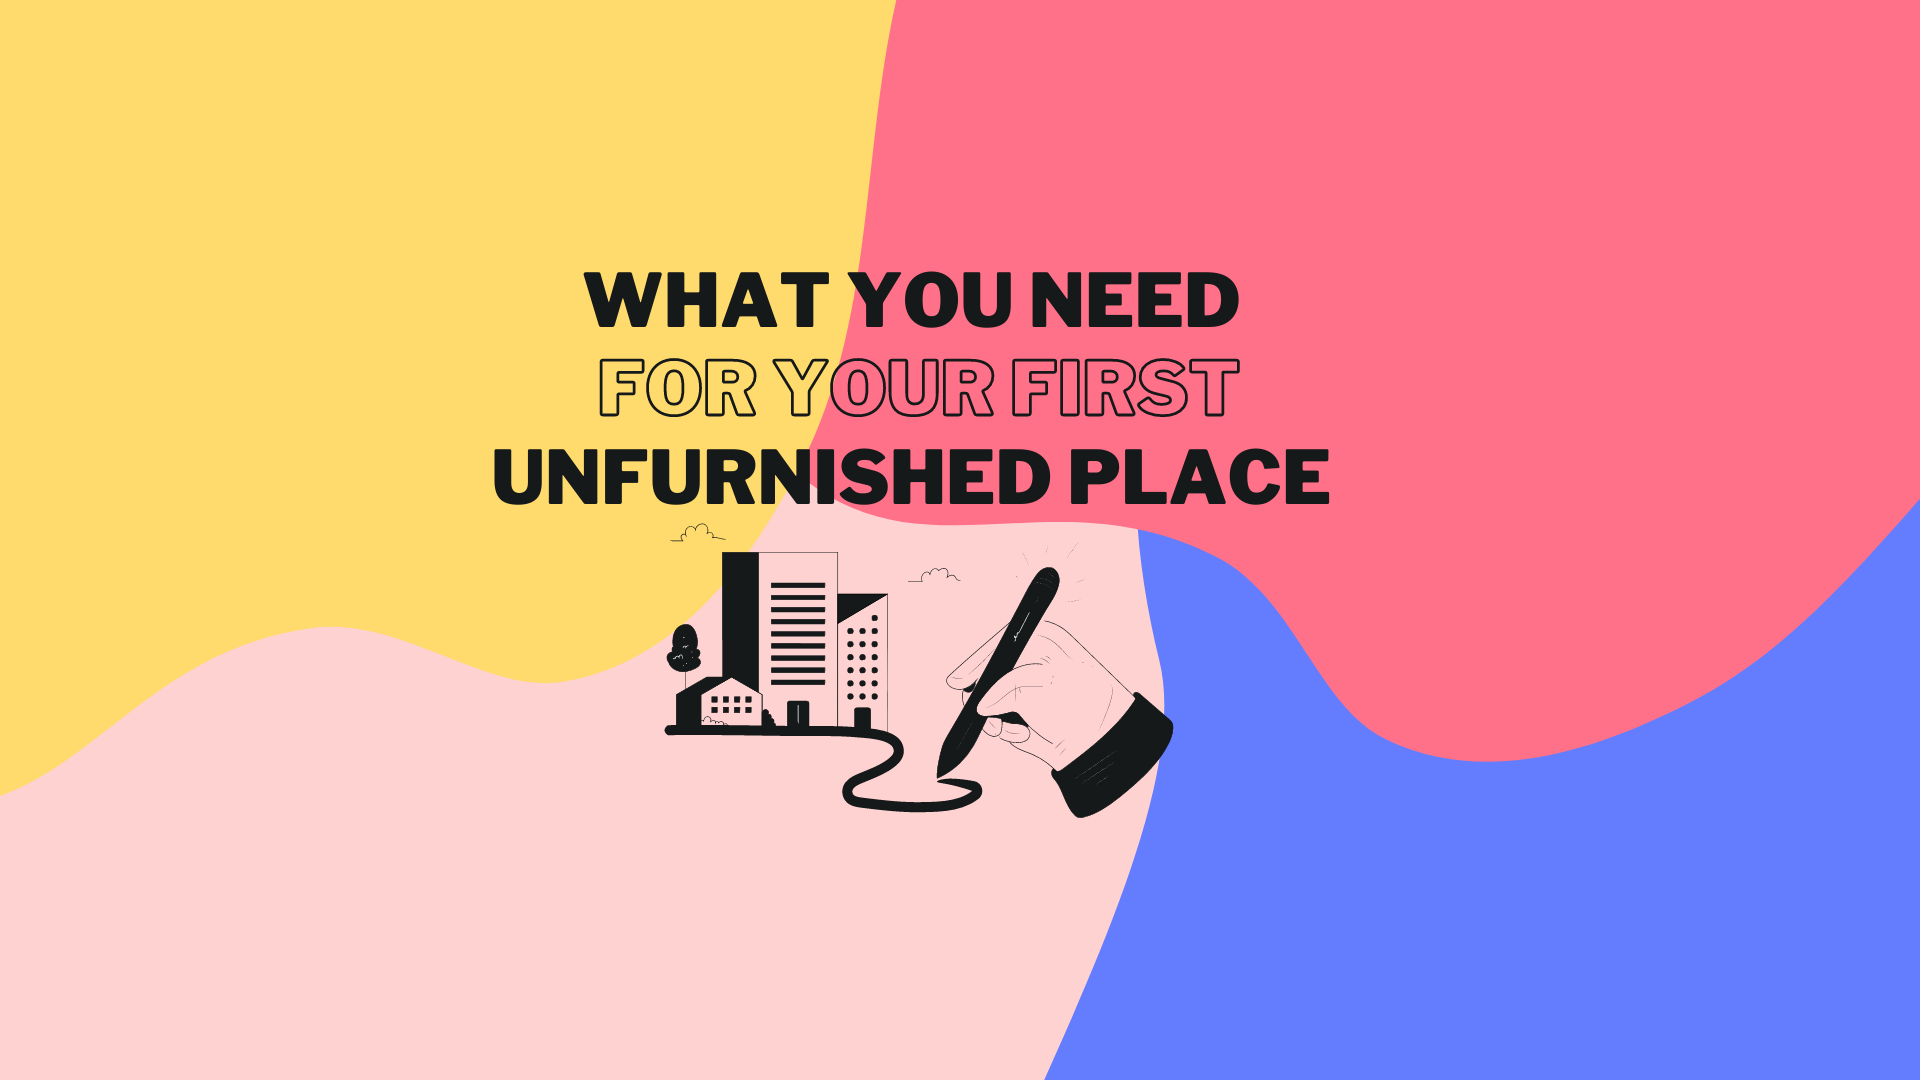 What you need for your first unfurnished place